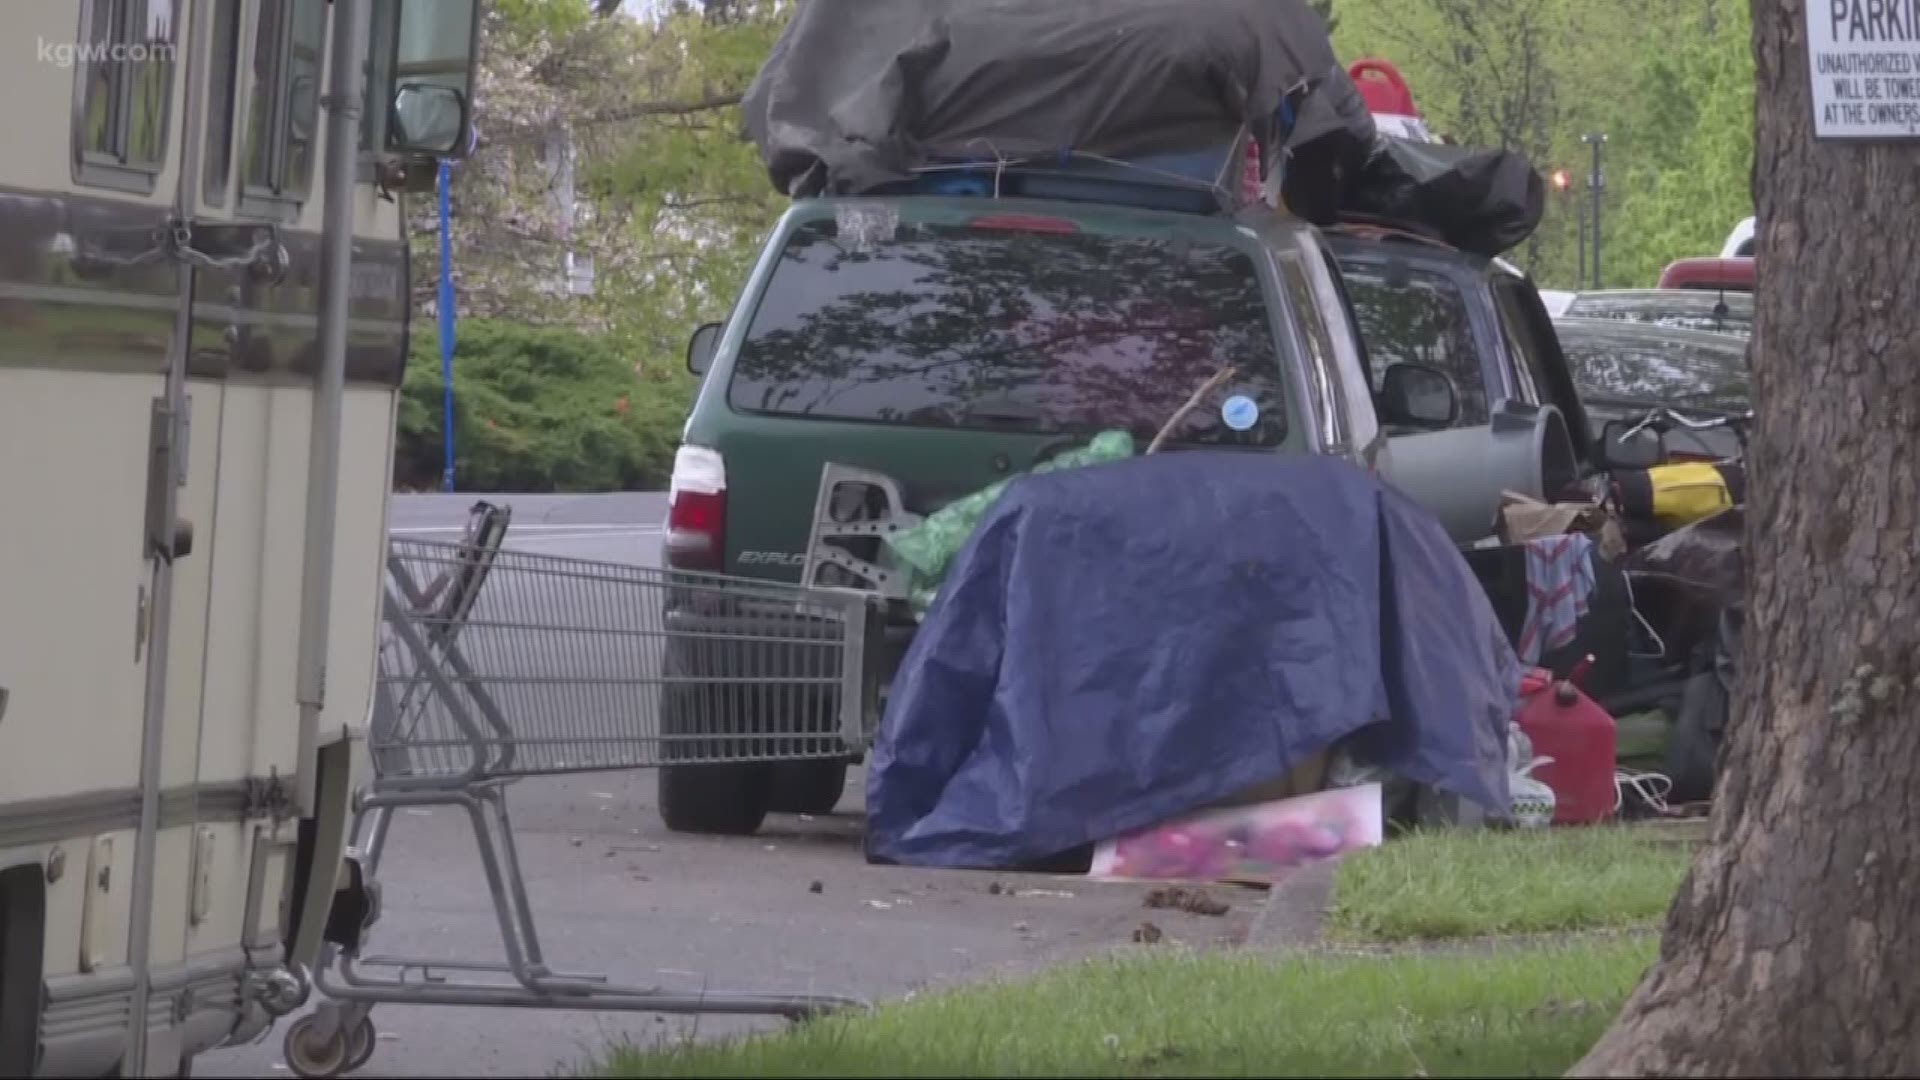 The Beaverton City Council passed an ordinance on Tuesday, June 12, 2018, than bans camping on its streets and other right-of-way areas.